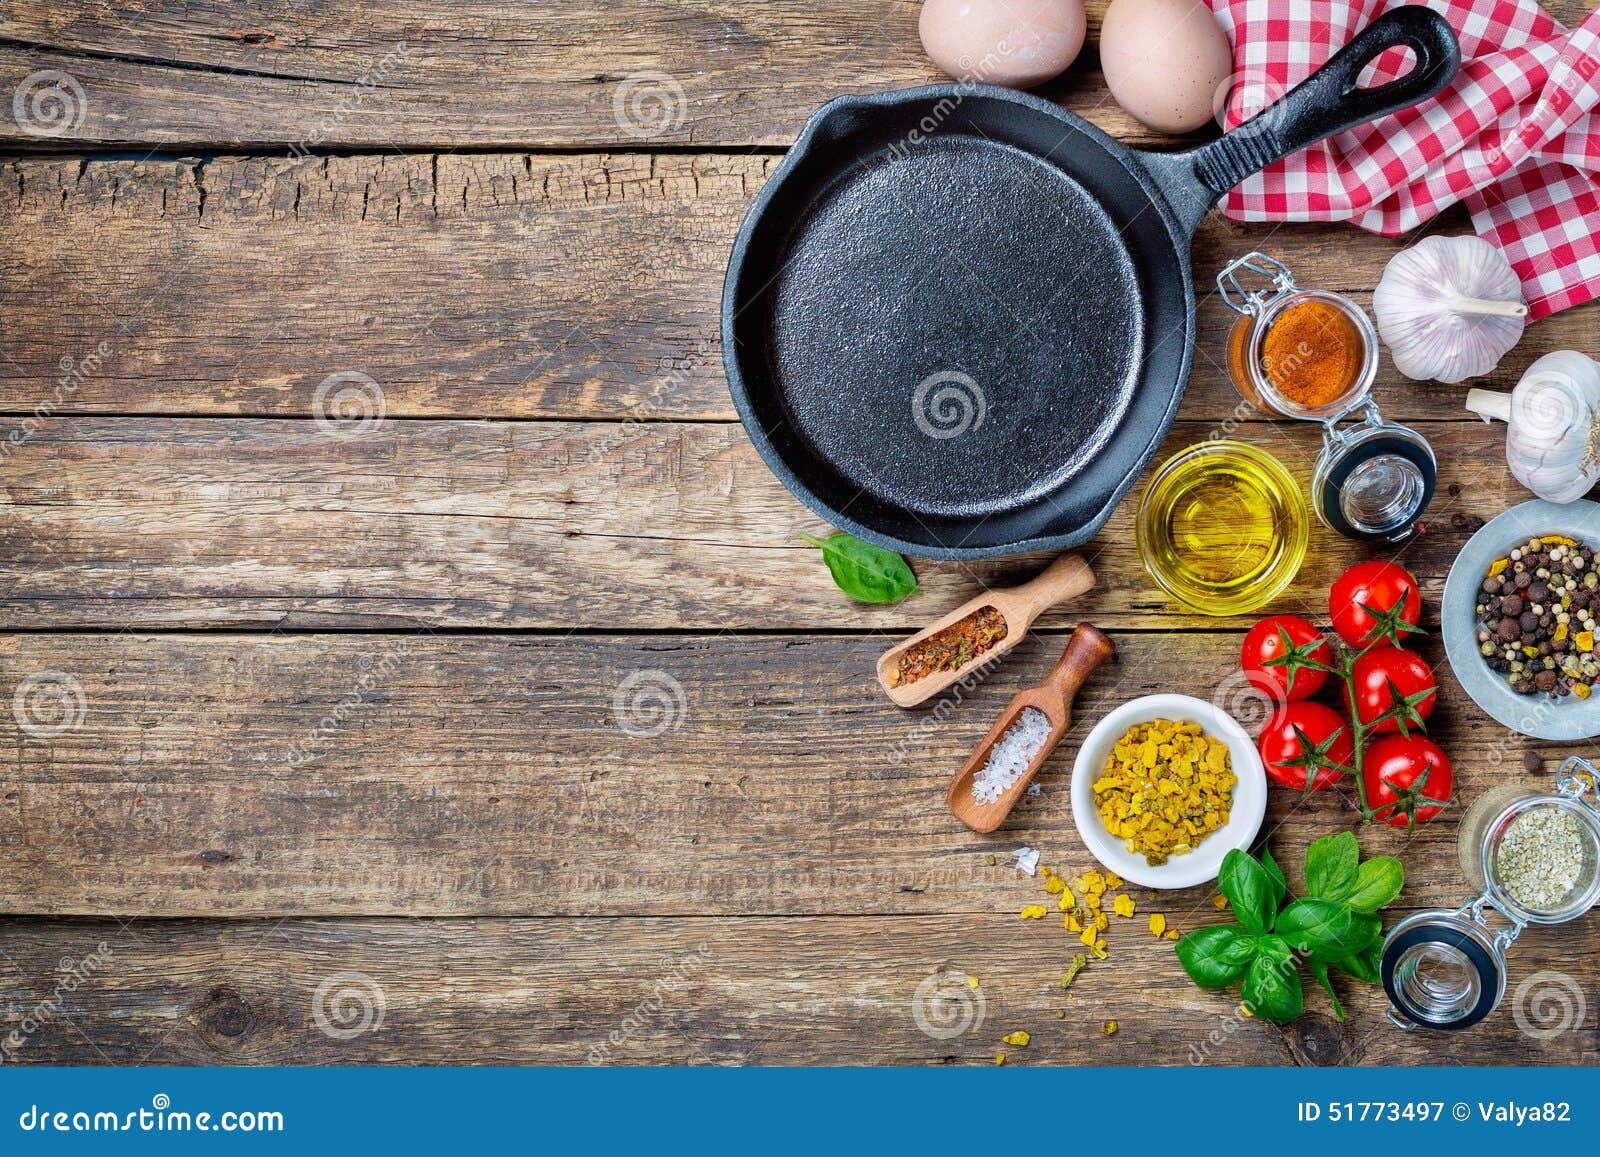 Ingredients For Cooking And Cast Iron Skillet Stock Photo 